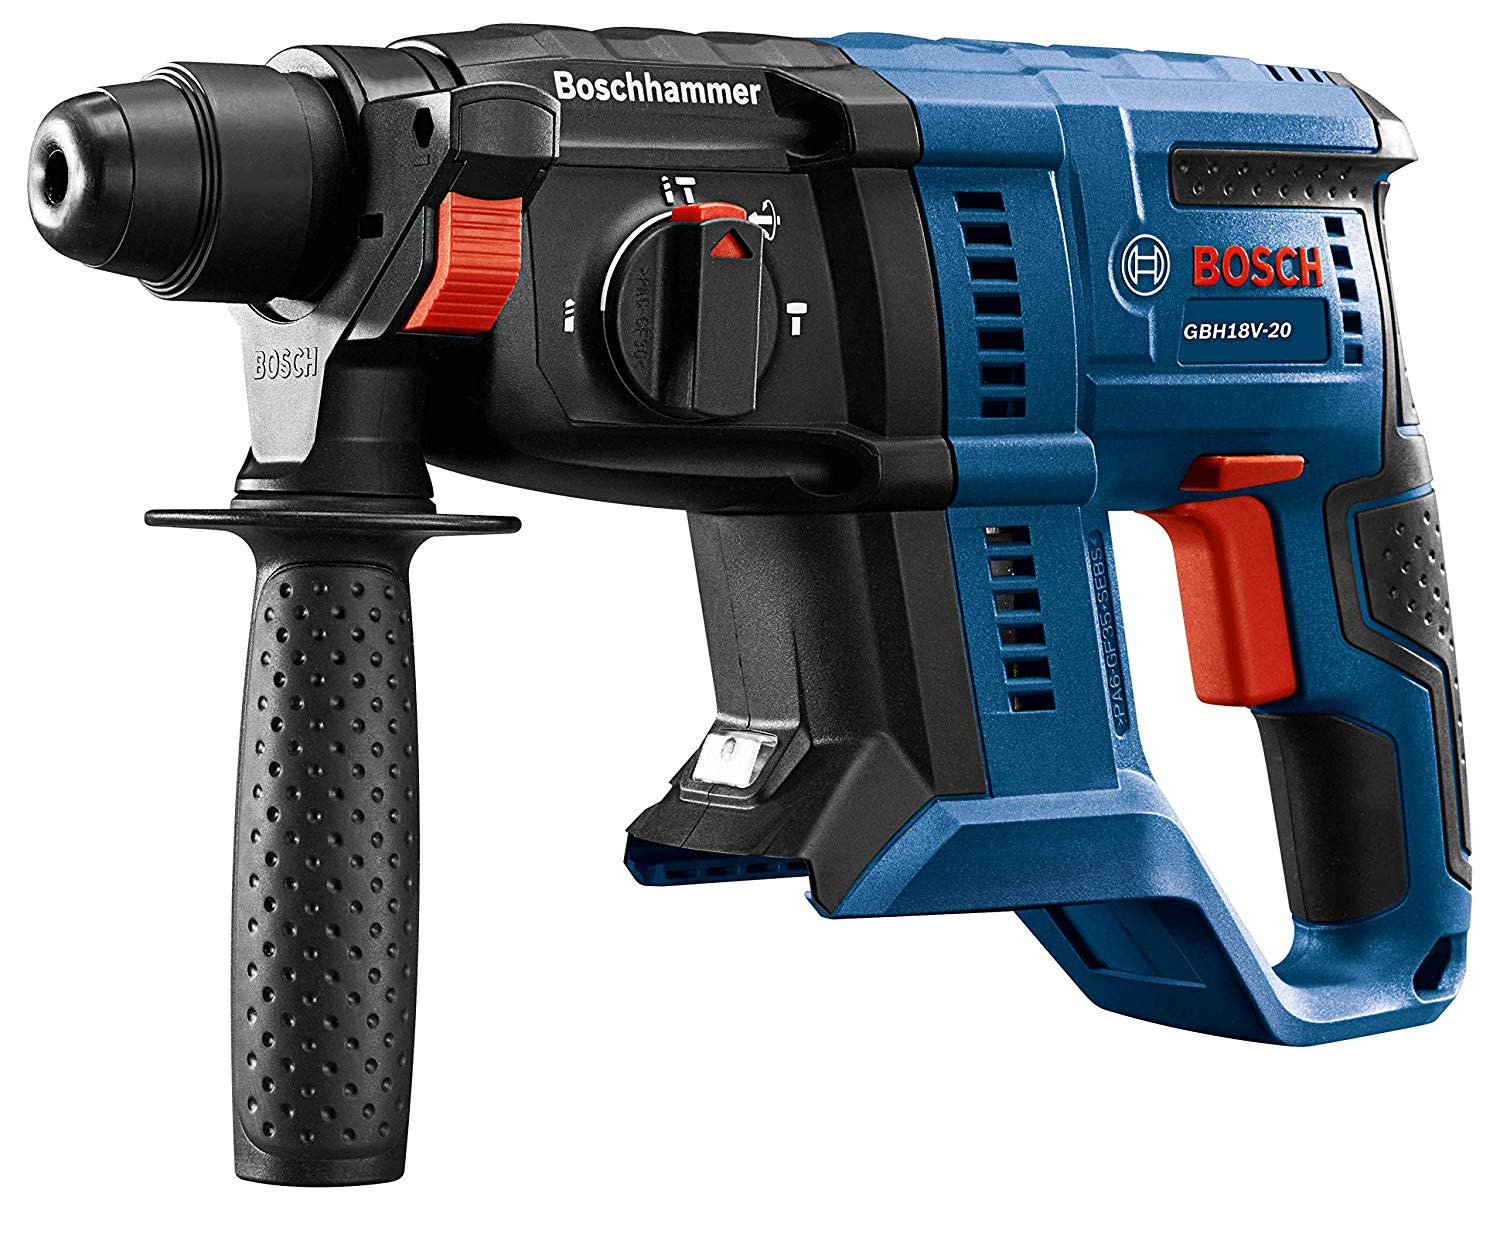 bosch 18v sds-plus rotary hammer for $118 - gbh